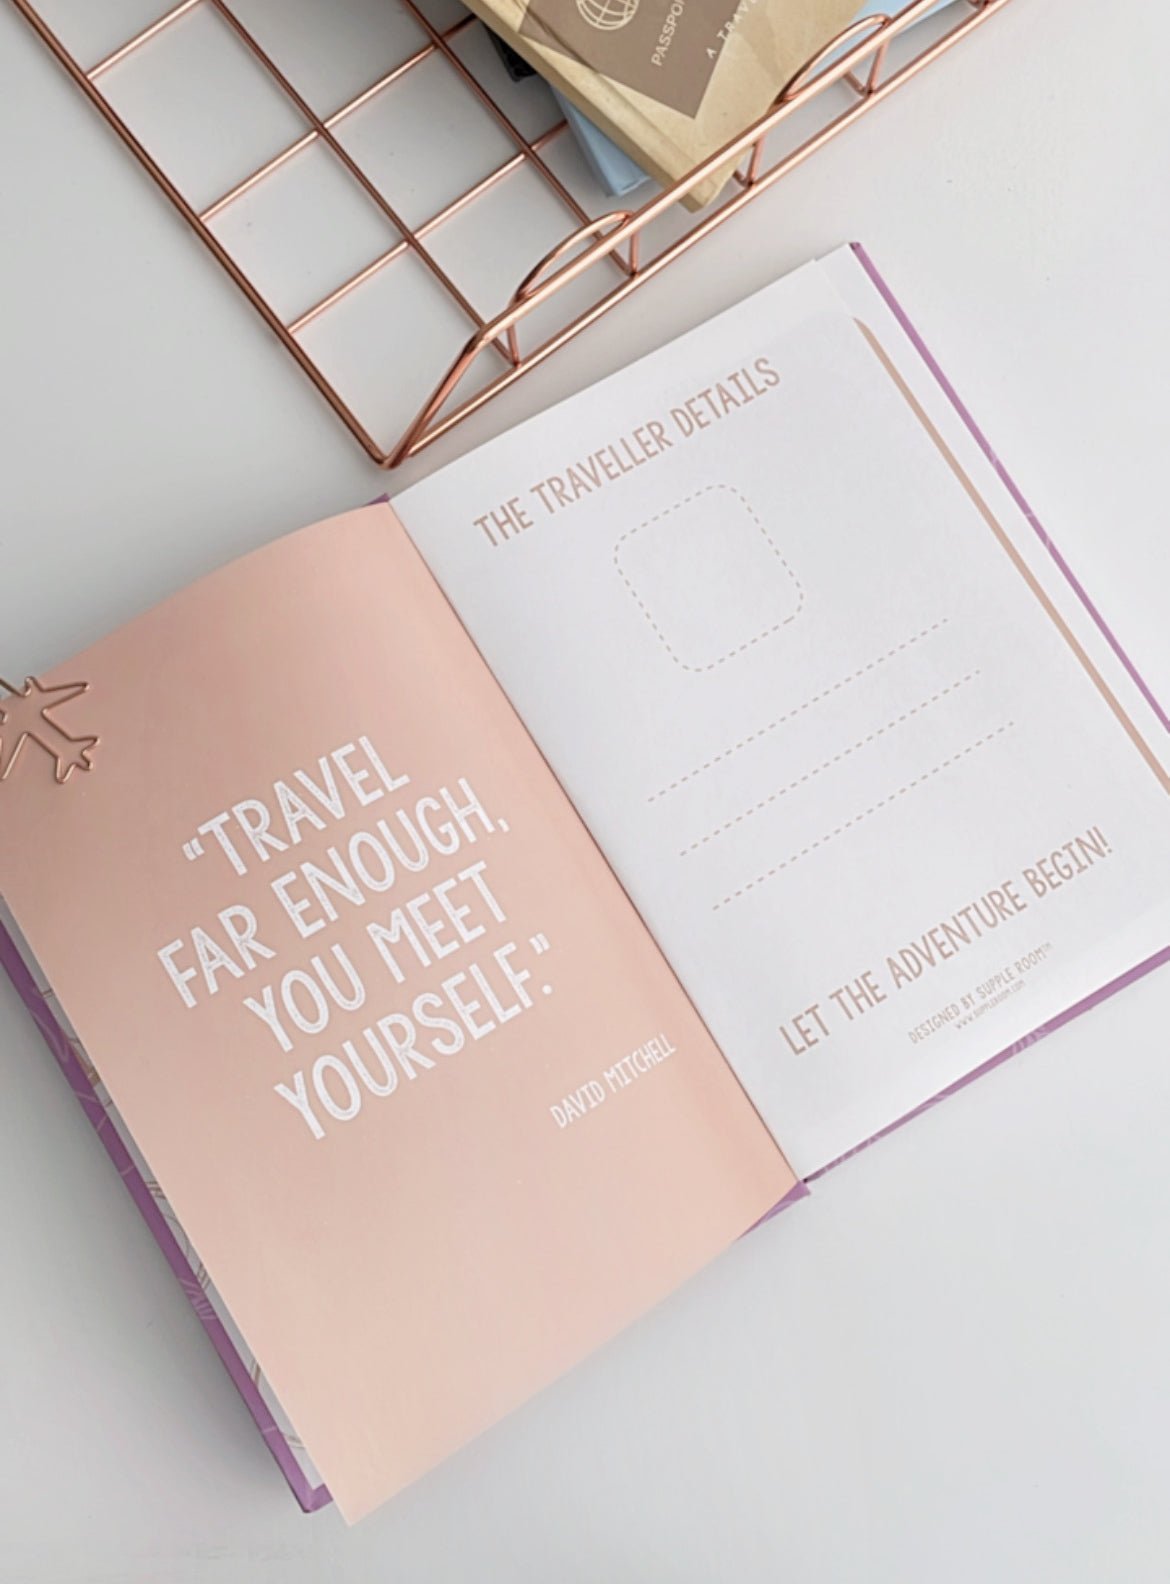 Lets go Travel Planner Journal | A5 Size Hardcover - Supple Room